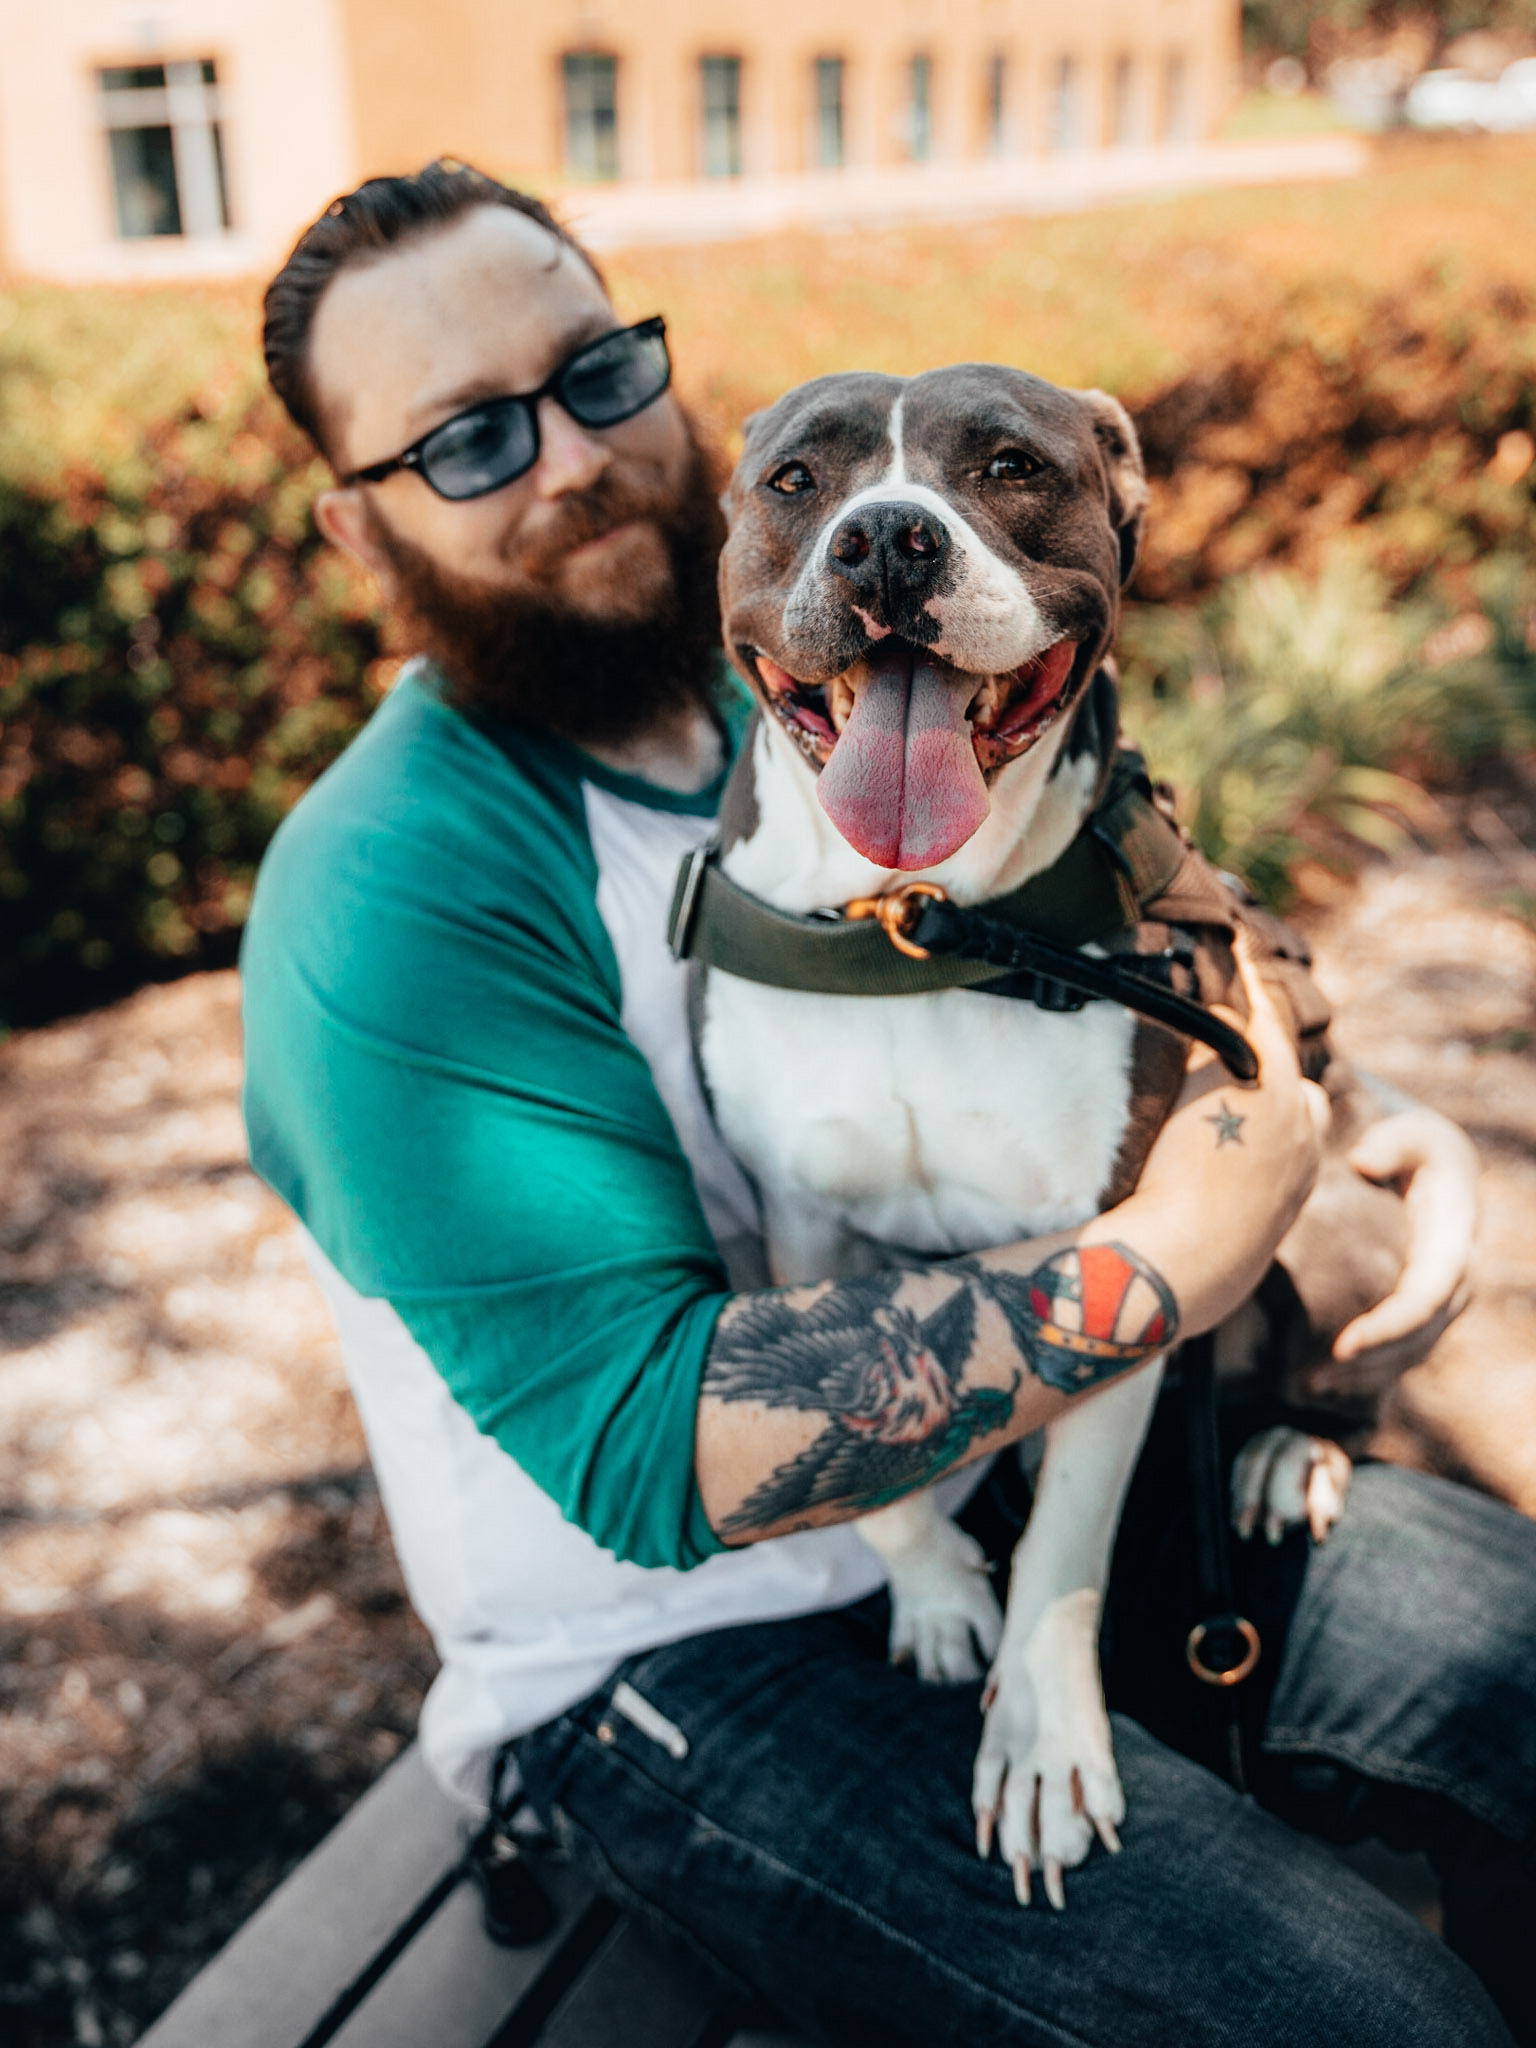 David, a Marine veteran with his service dog Katie, a Staffordshire terrier mix. David graduated from Tony La Russa's Animal Rescue Foundation’s Pets and Vets program in 2017. ARF has once again partnered with Purina Dog Chow for its second annual “Service Dog Salute” campaign to raise awareness on how military veterans suffering from PTSD and their families can benefit from having a service dog.